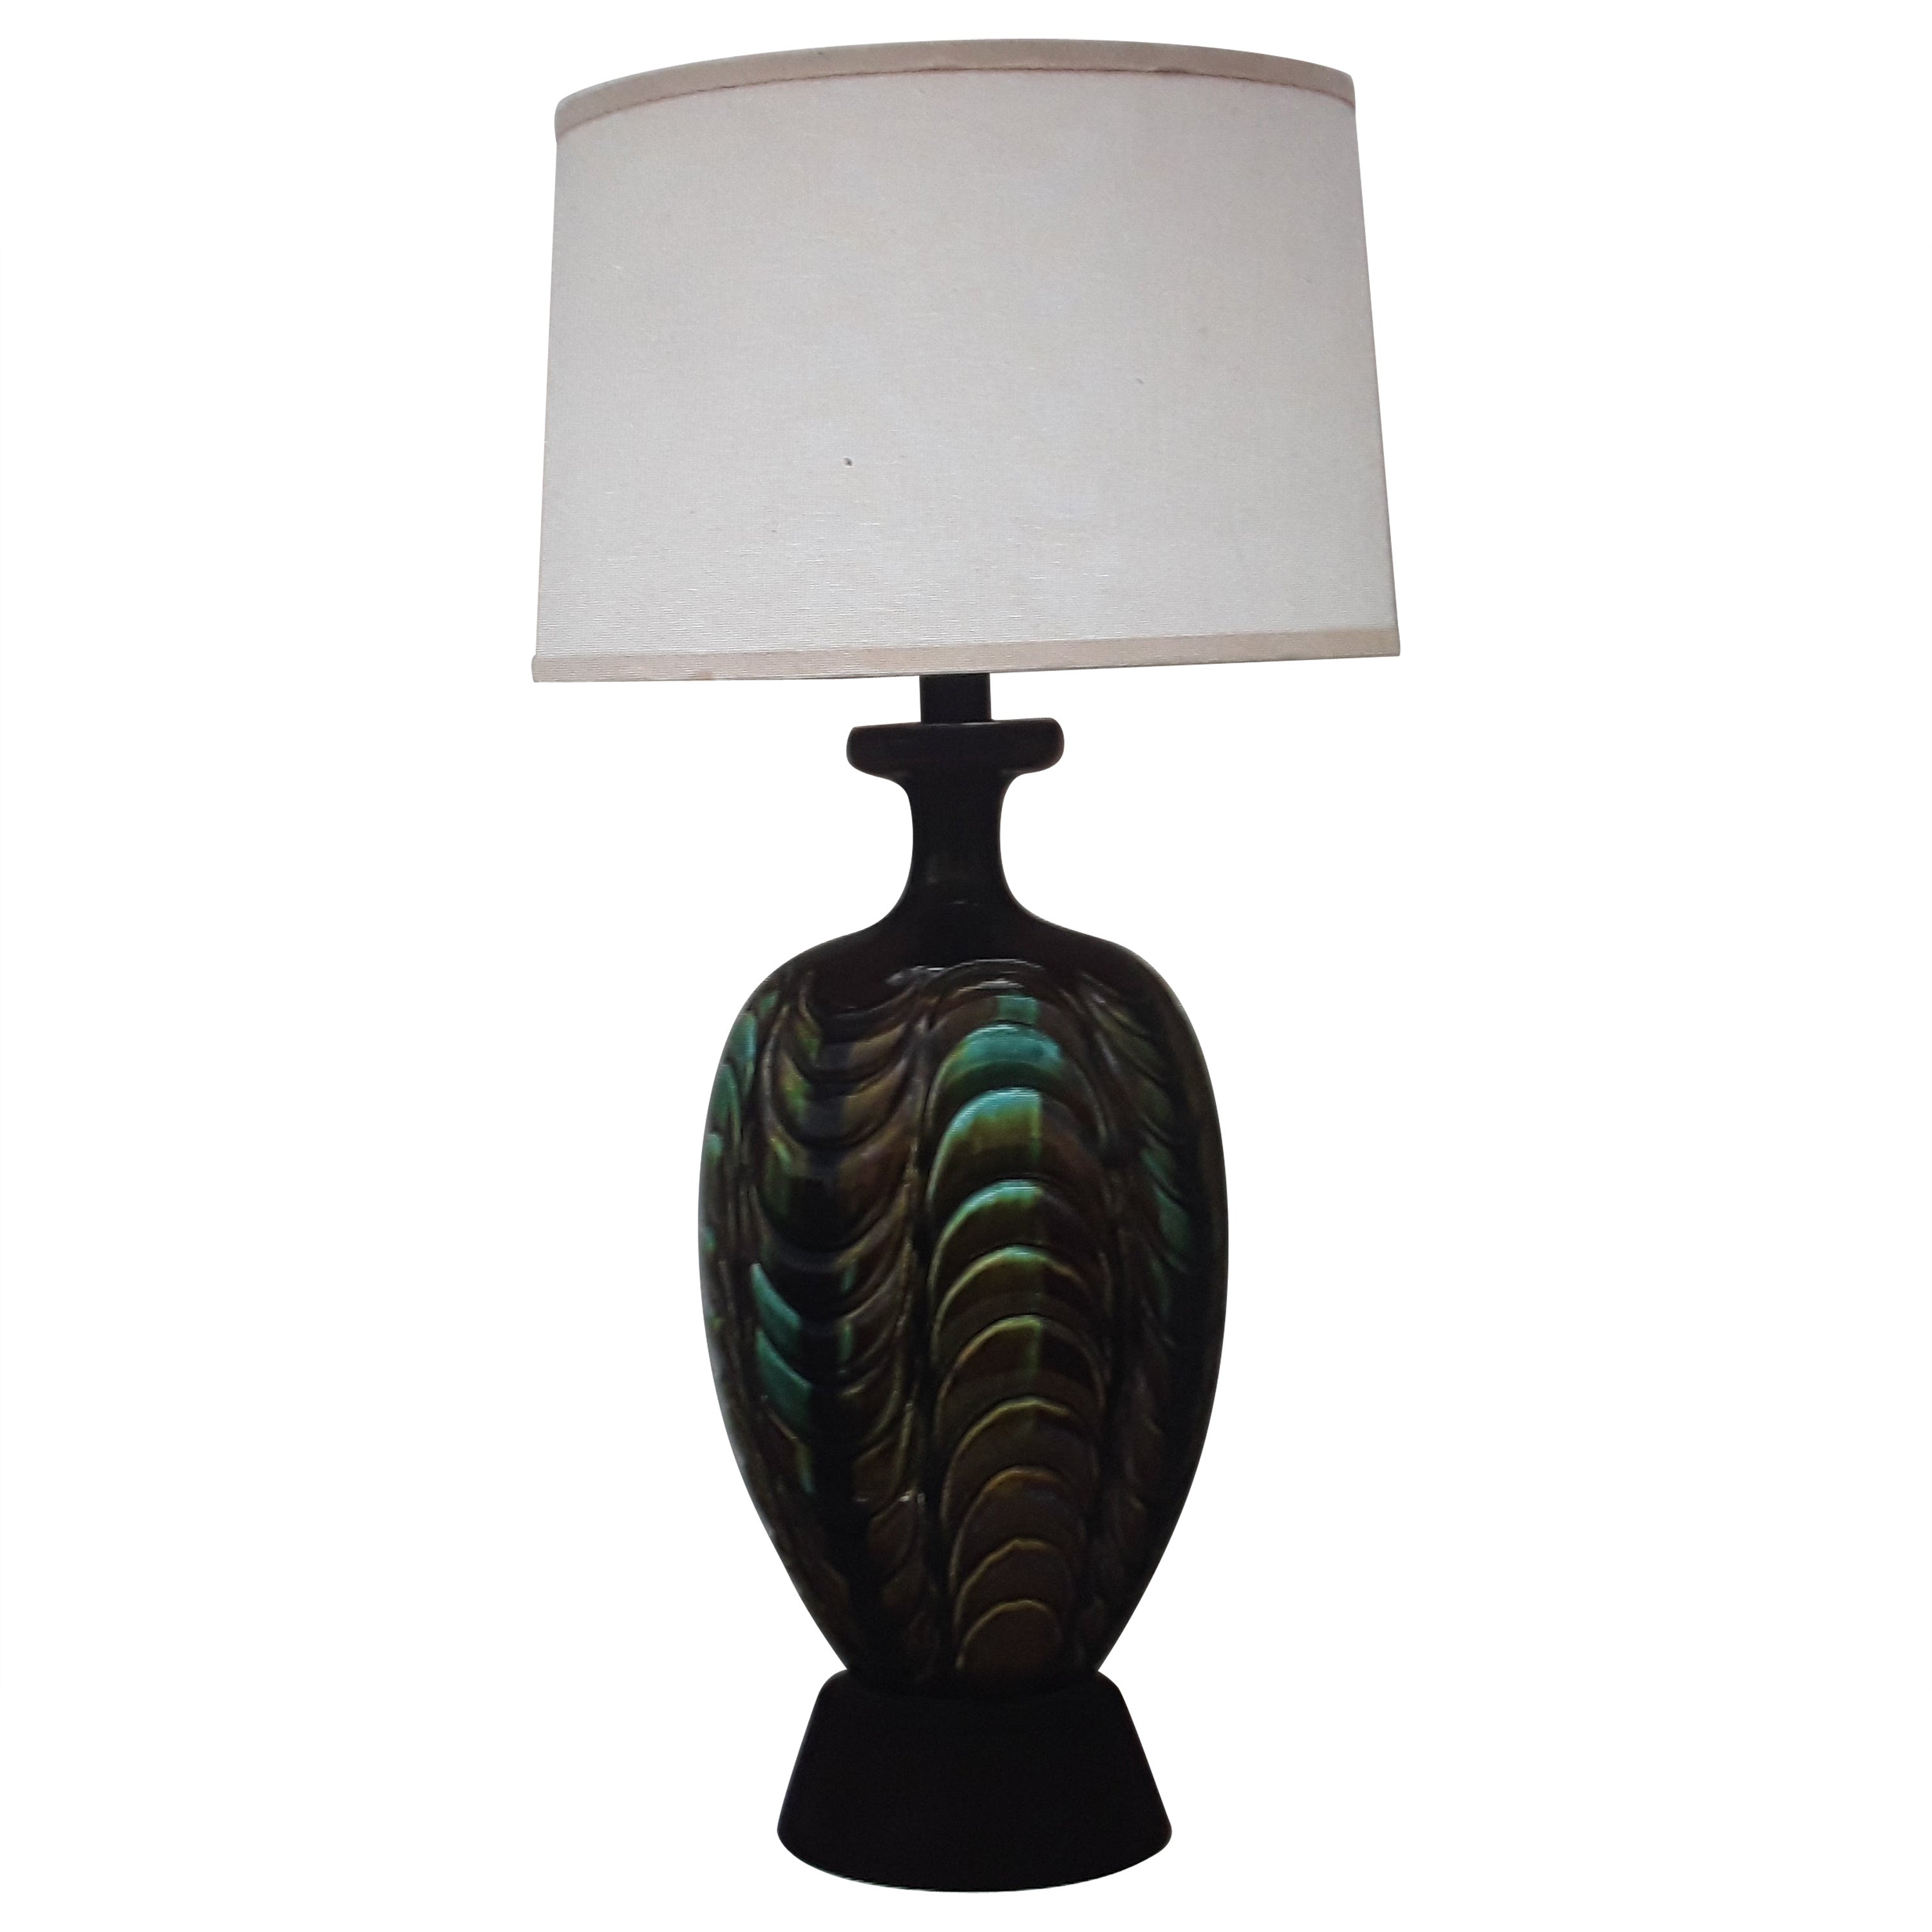 1940's Hollywood Regency Multi Color Earth Tones Glazed Table Lamp With Shade